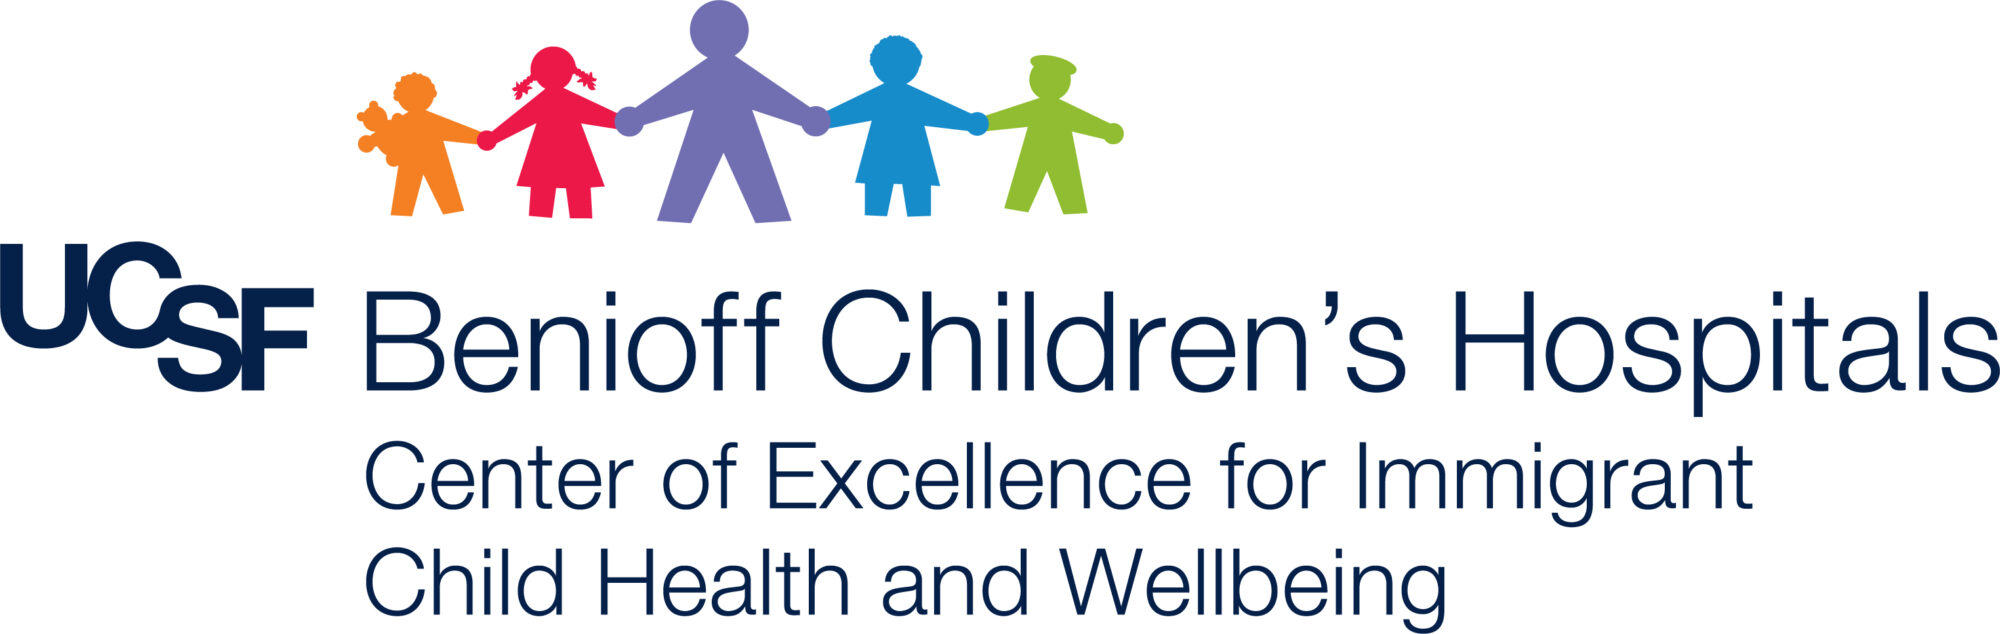 UCSF Benioff Center of Excellence for Immigrant Child Health and Wellbeing